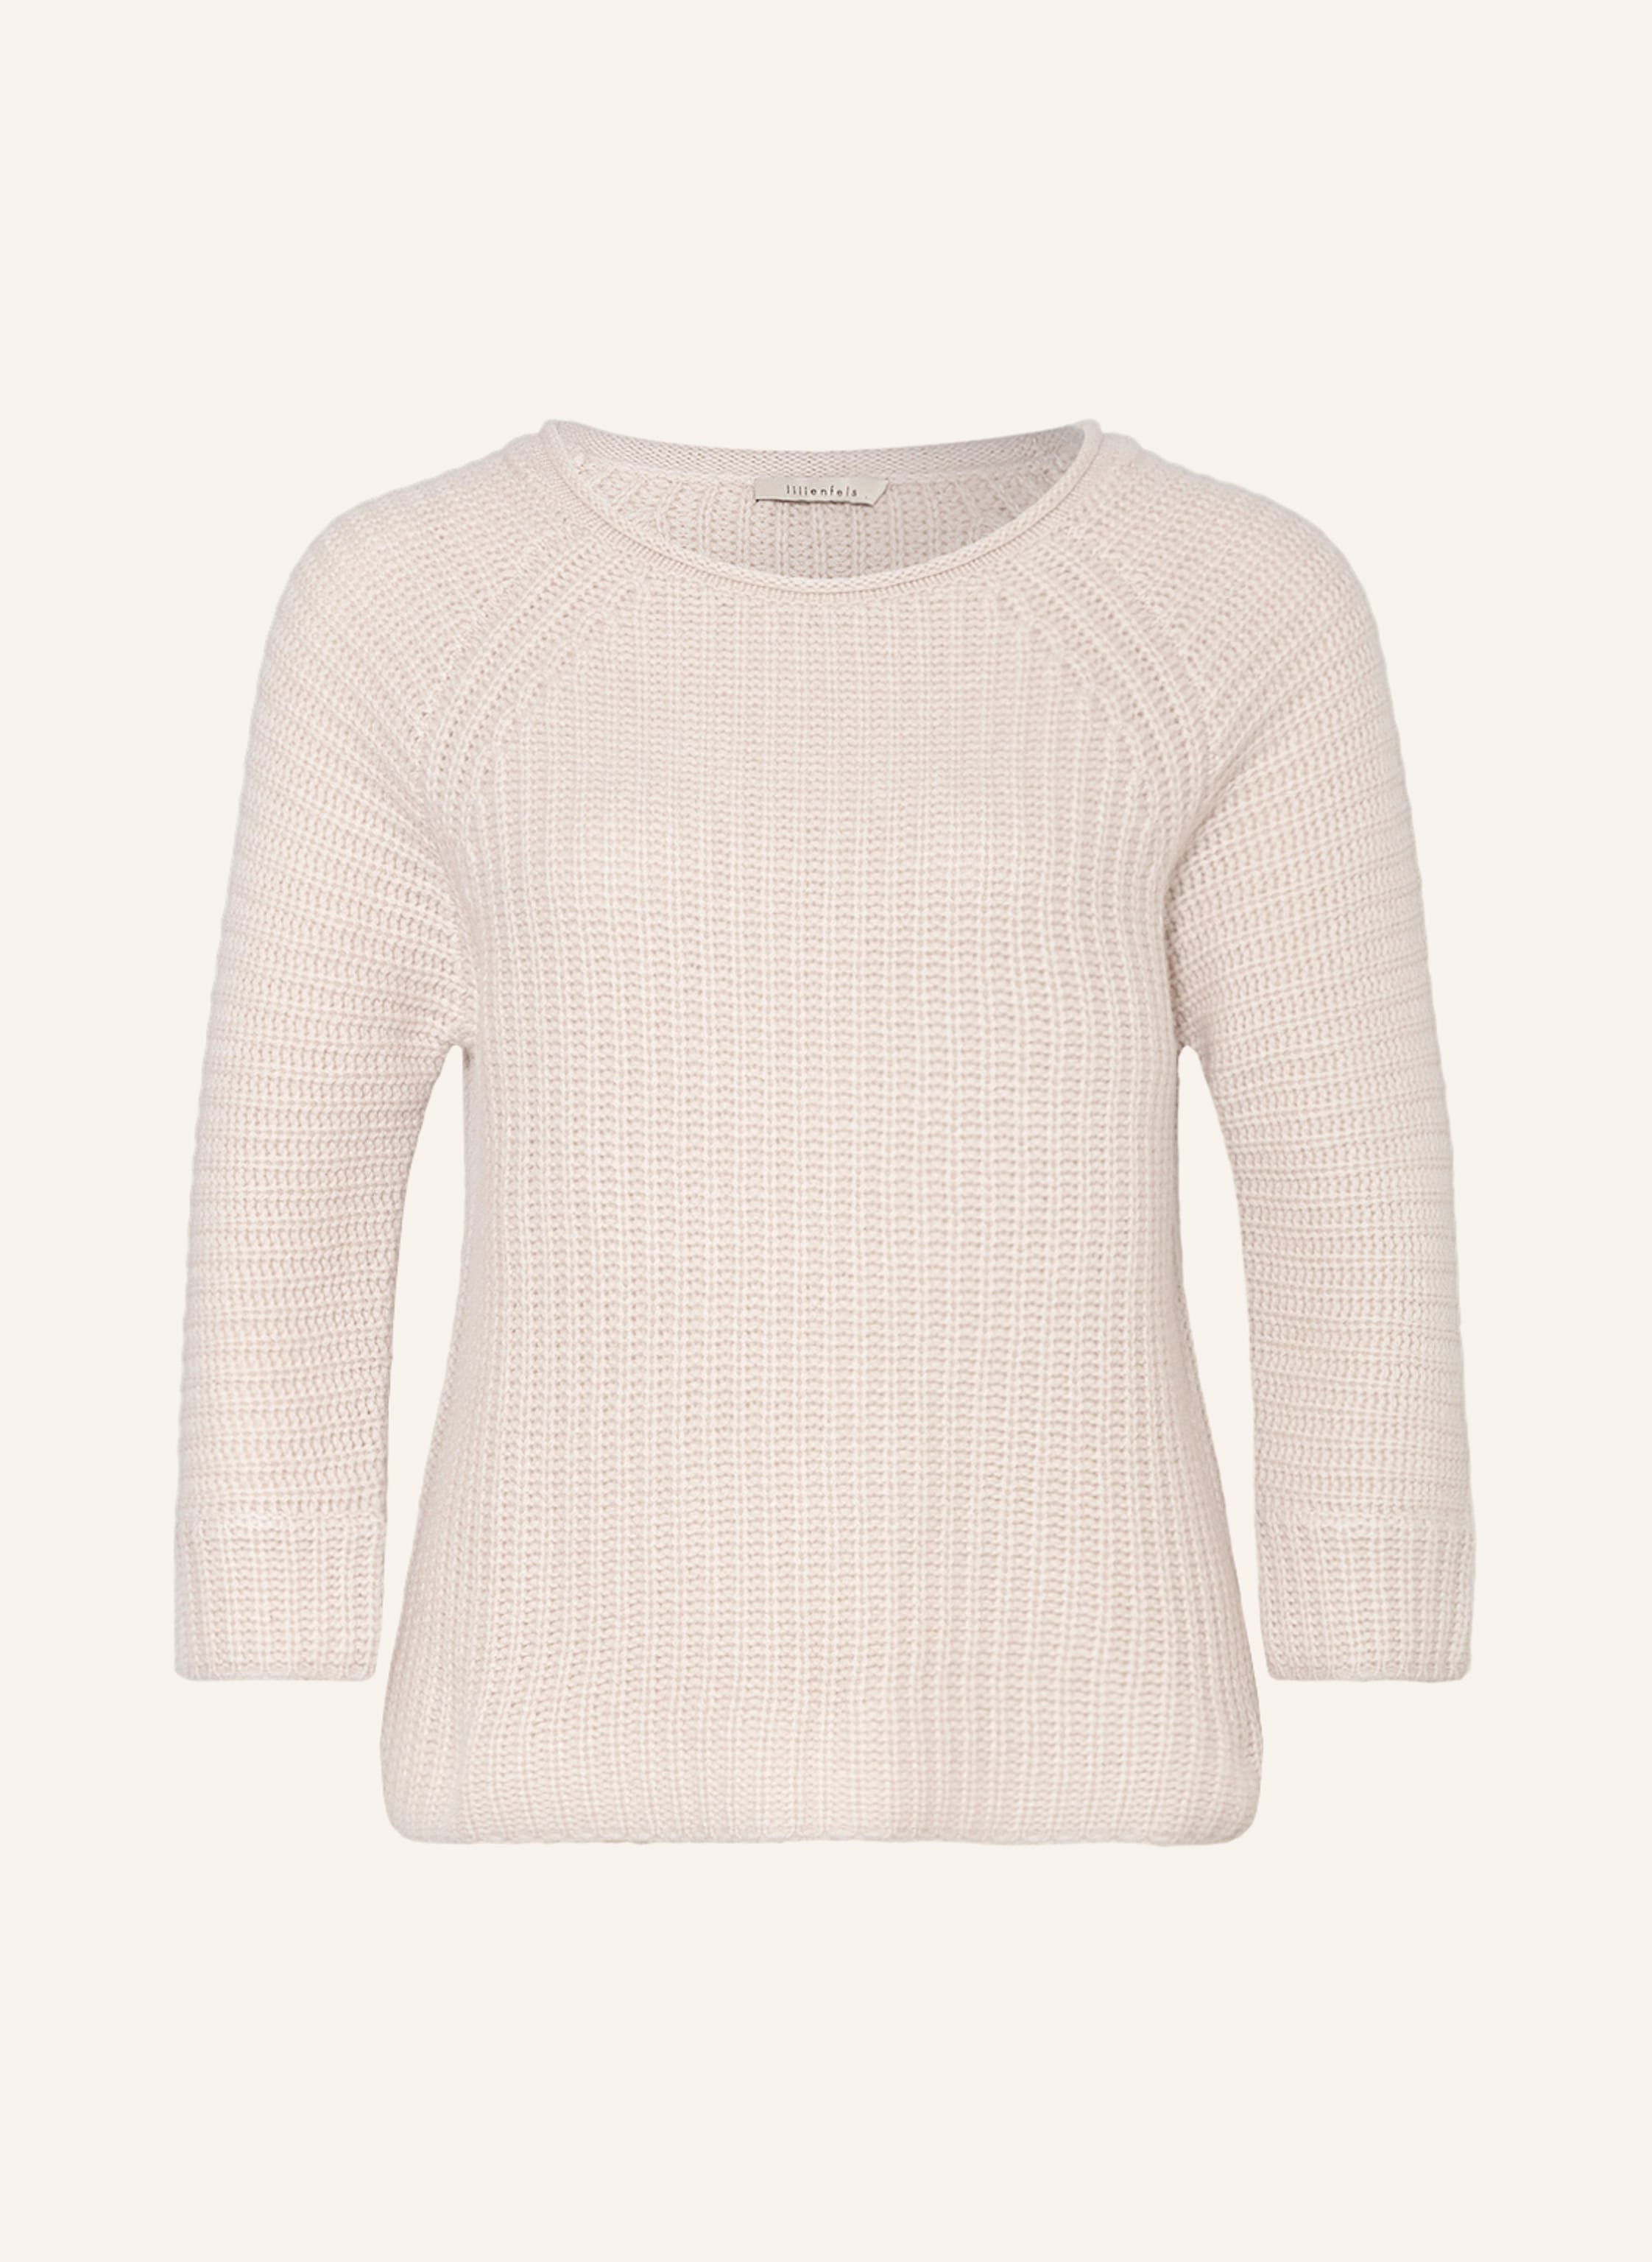 lilienfels Cashmere sweater with 3/4 sleeves in cream | Breuninger